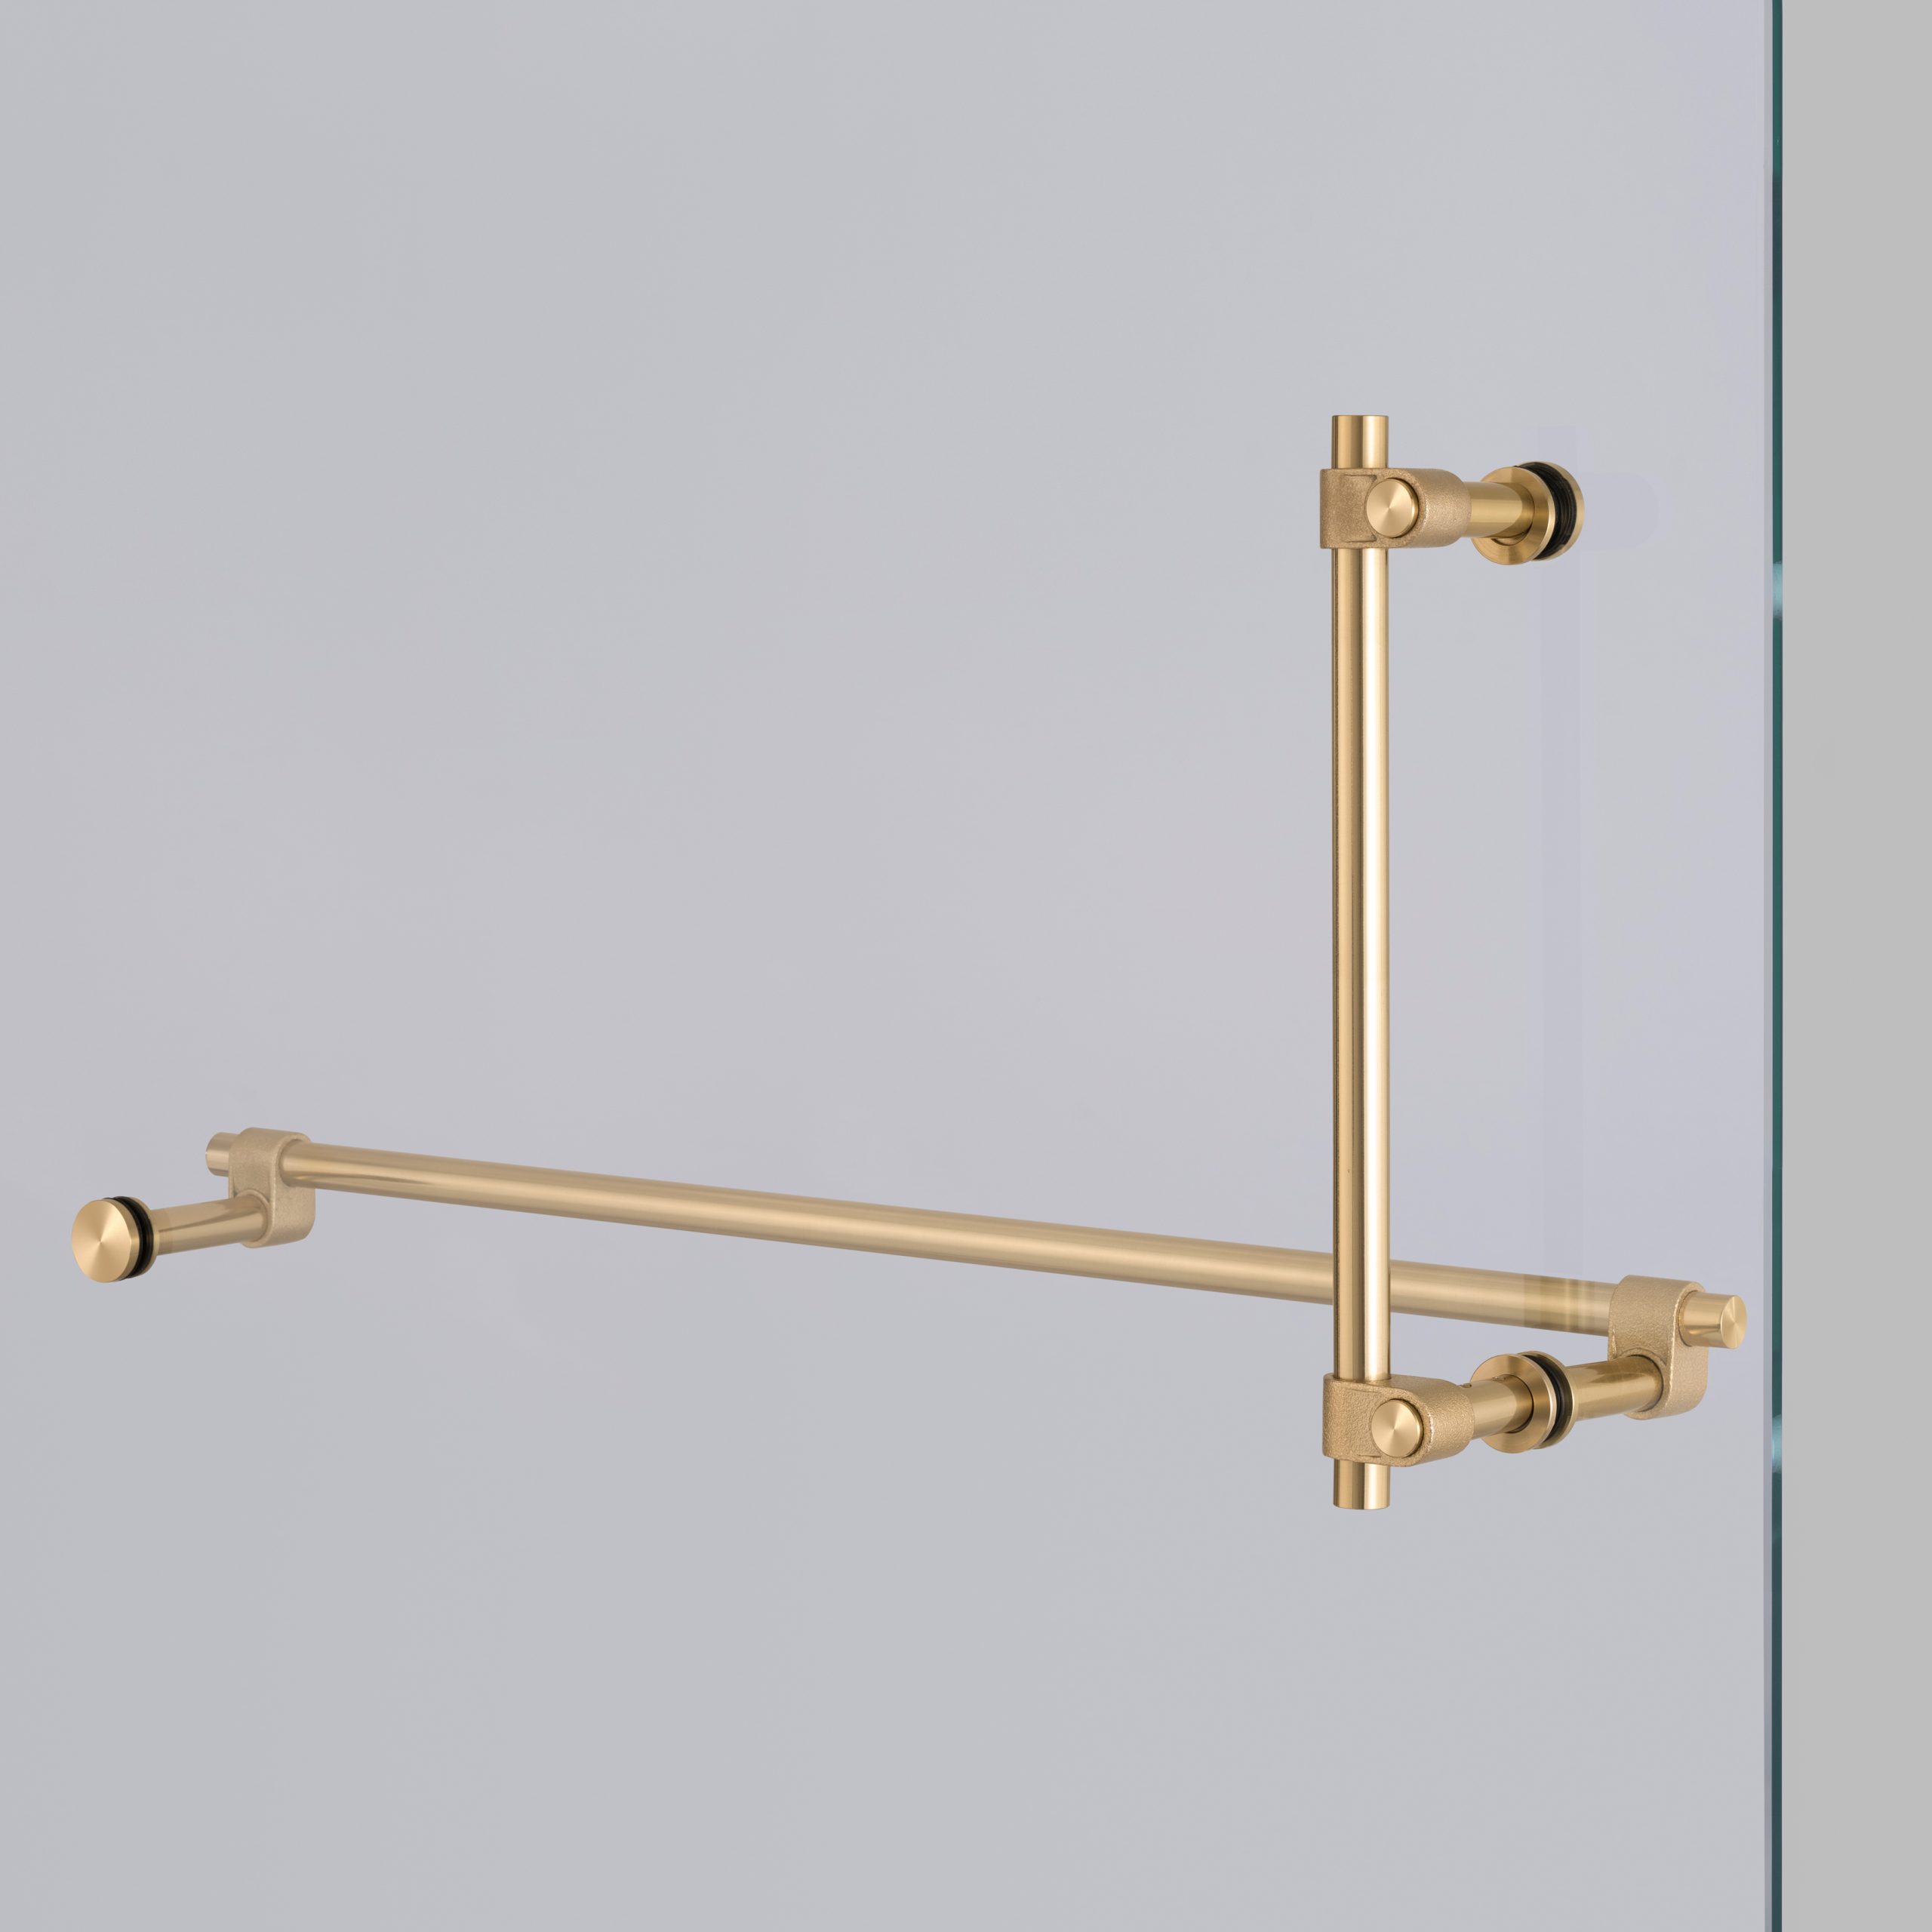 https://www.busterandpunch.com/us/wp-content/uploads/sites/2/2022/03/BP_Cast_Towel_Rail_and_Pull_Bar_Brass_A1_Web-scaled.jpg